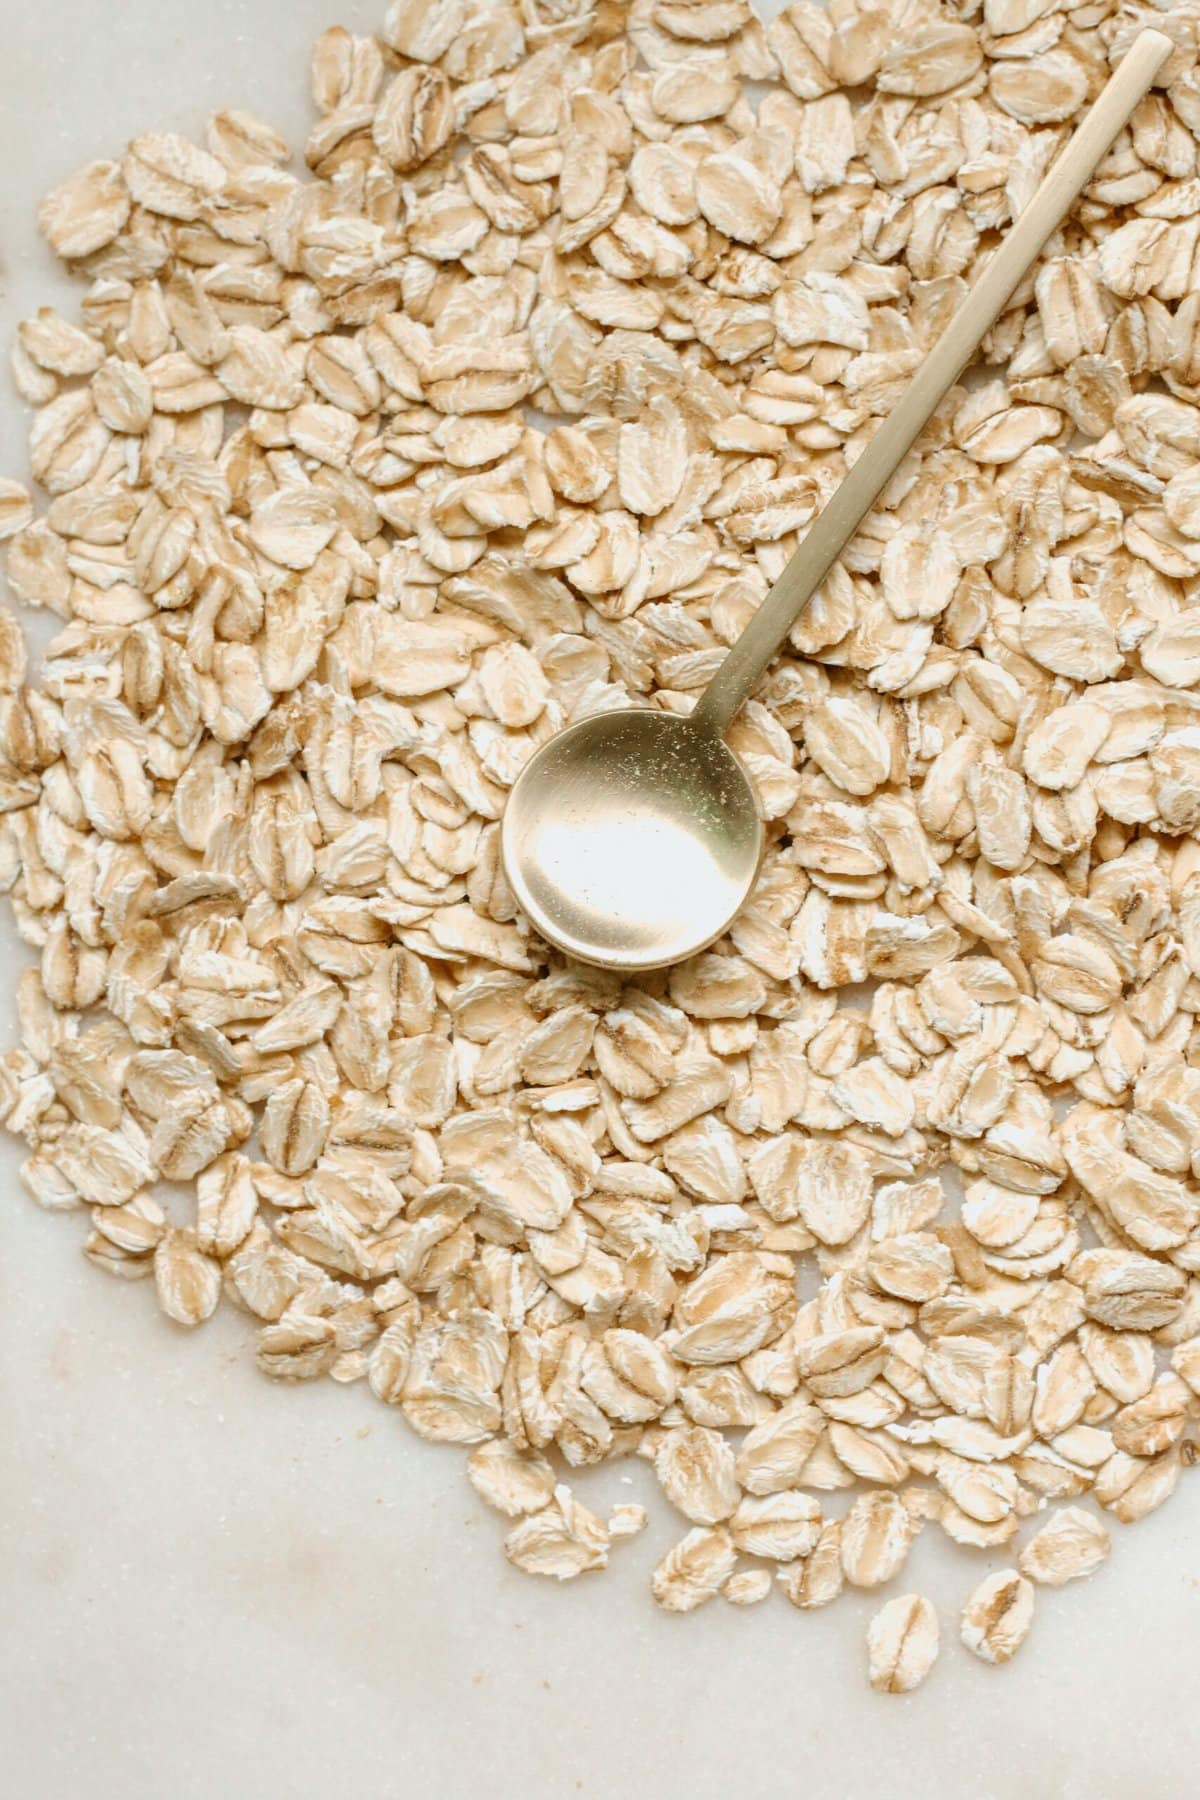 Oats on a table with a gold spoon.